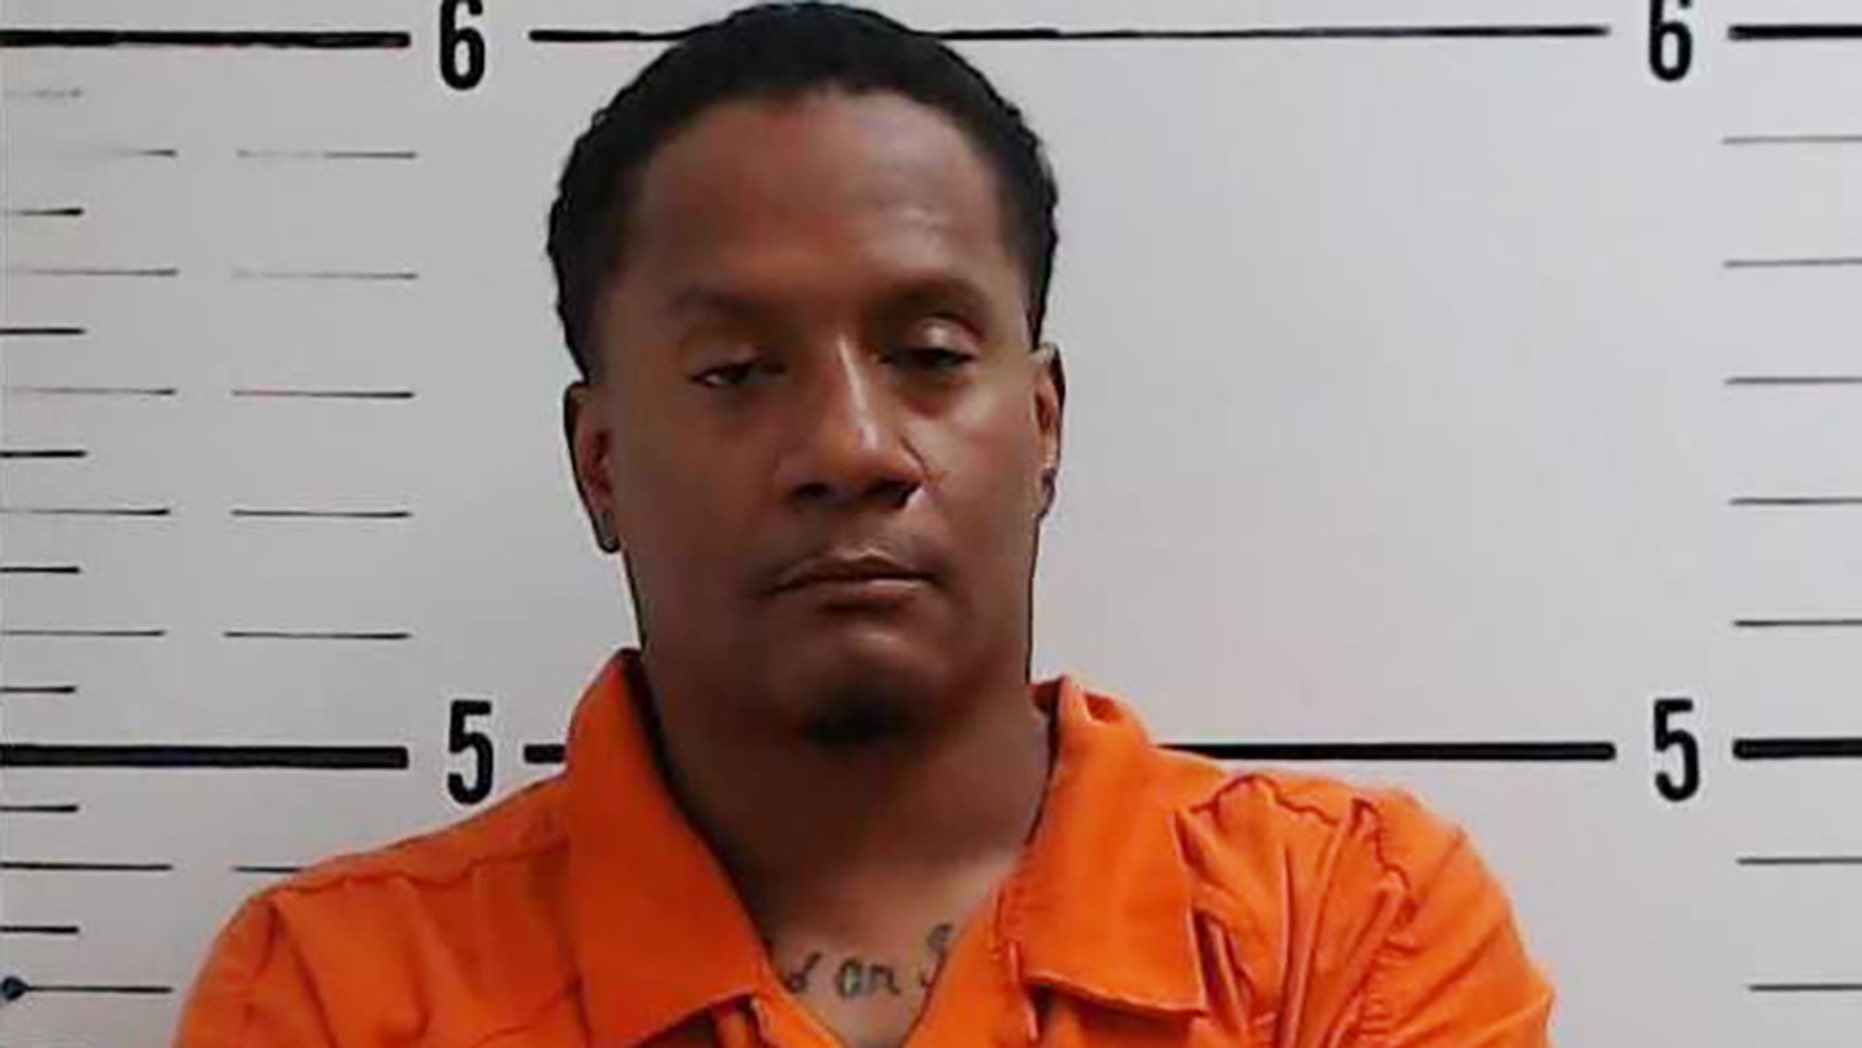 Byron Donnell Green, 41, was arrested at his home after allegedly shooting two children during a road rage incident.